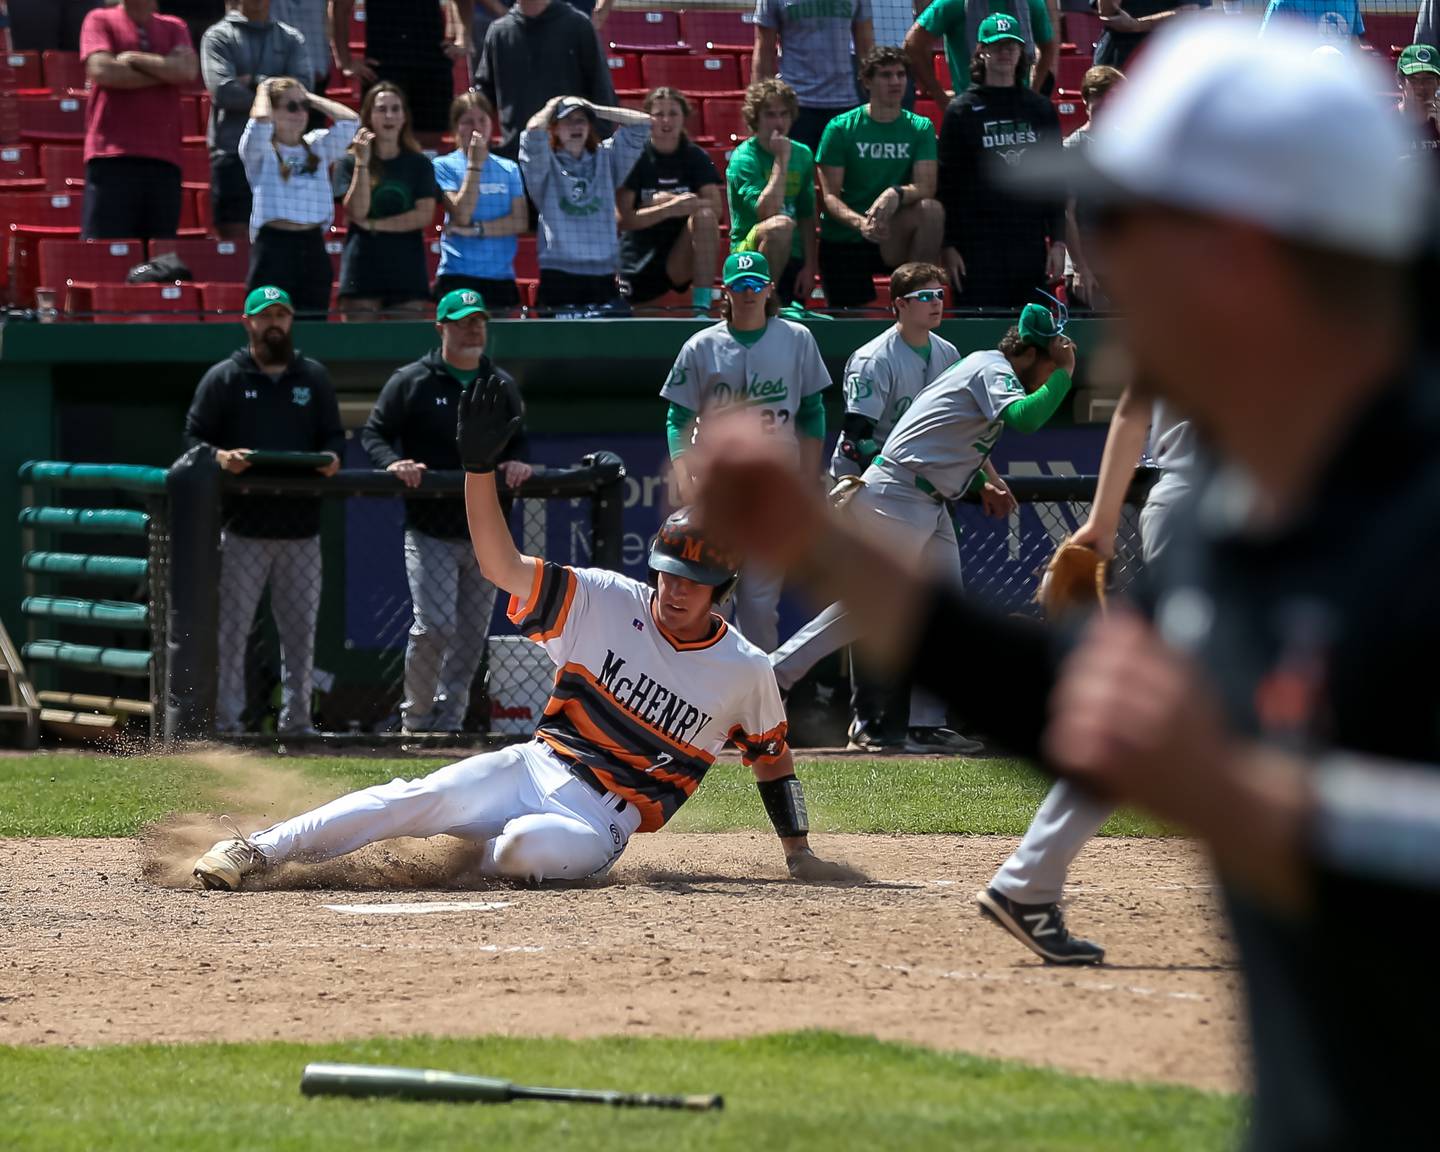 McHenry's Connor Rodgers (7) slides into home to score the game winning run for McHenry during the Class 4A Supersectional game between York at McHenry.  June 7, 2022.